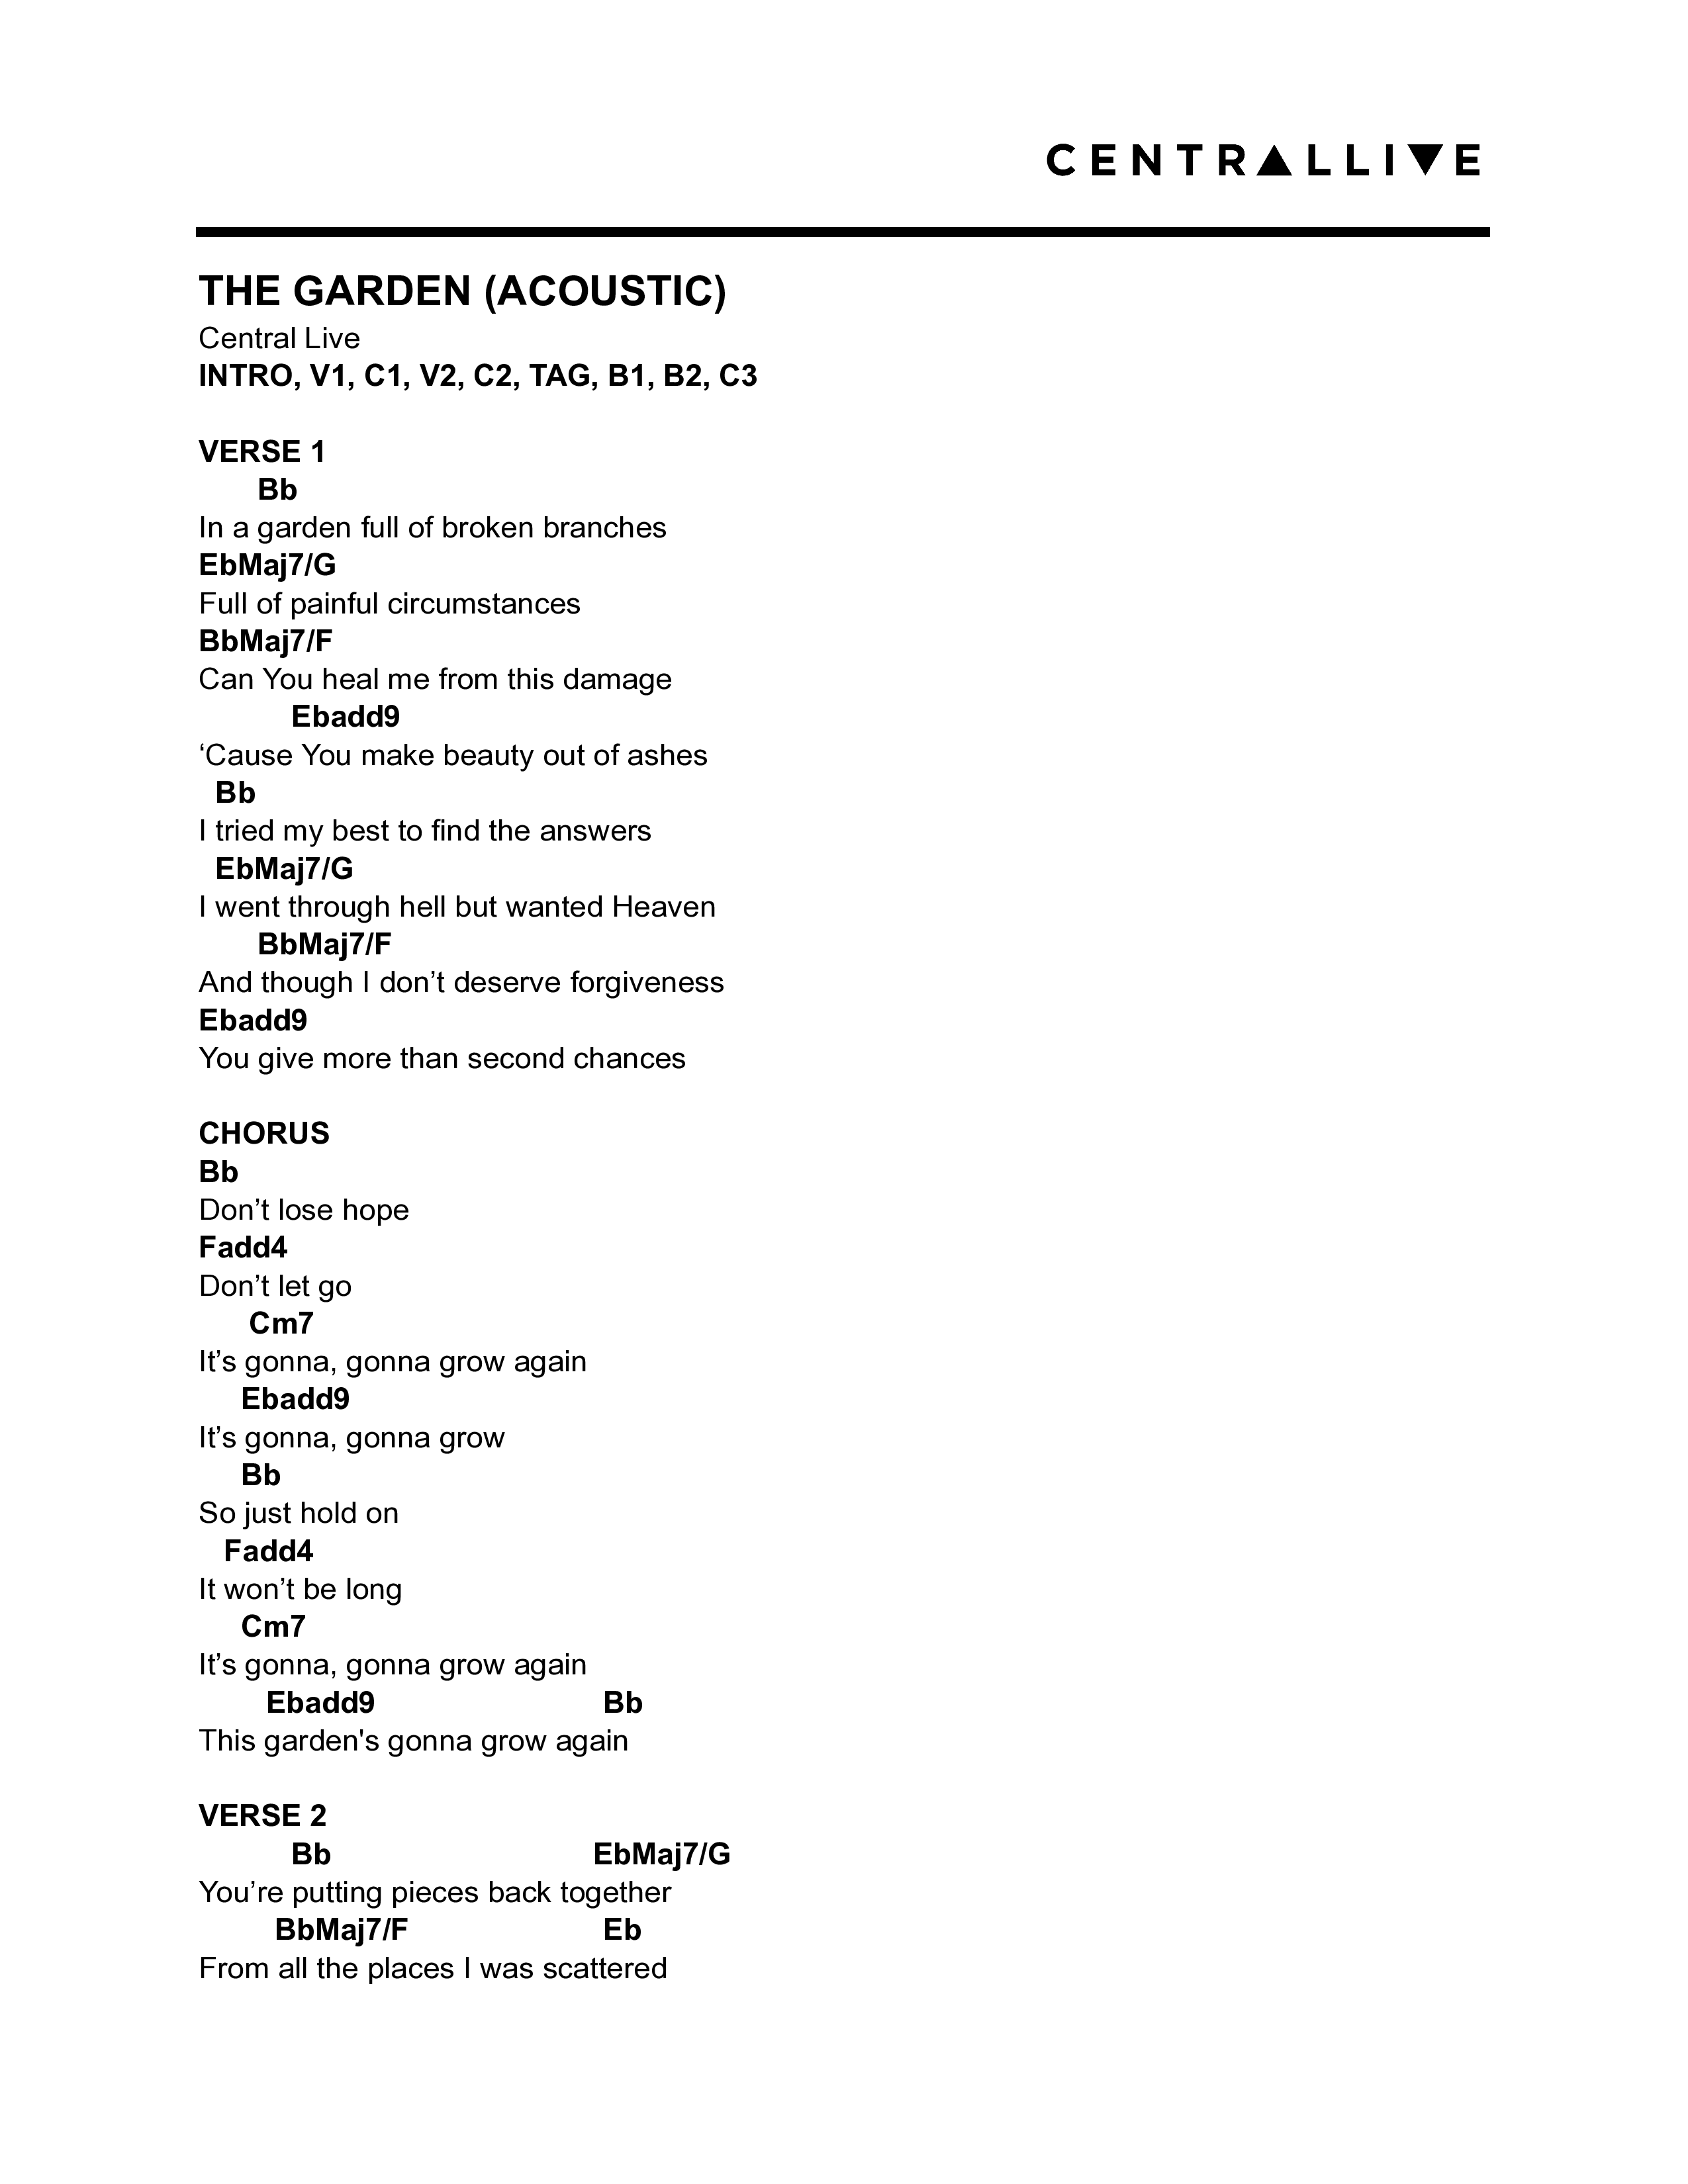 The Garden (Acoustic) Chord Chart (Central Live)